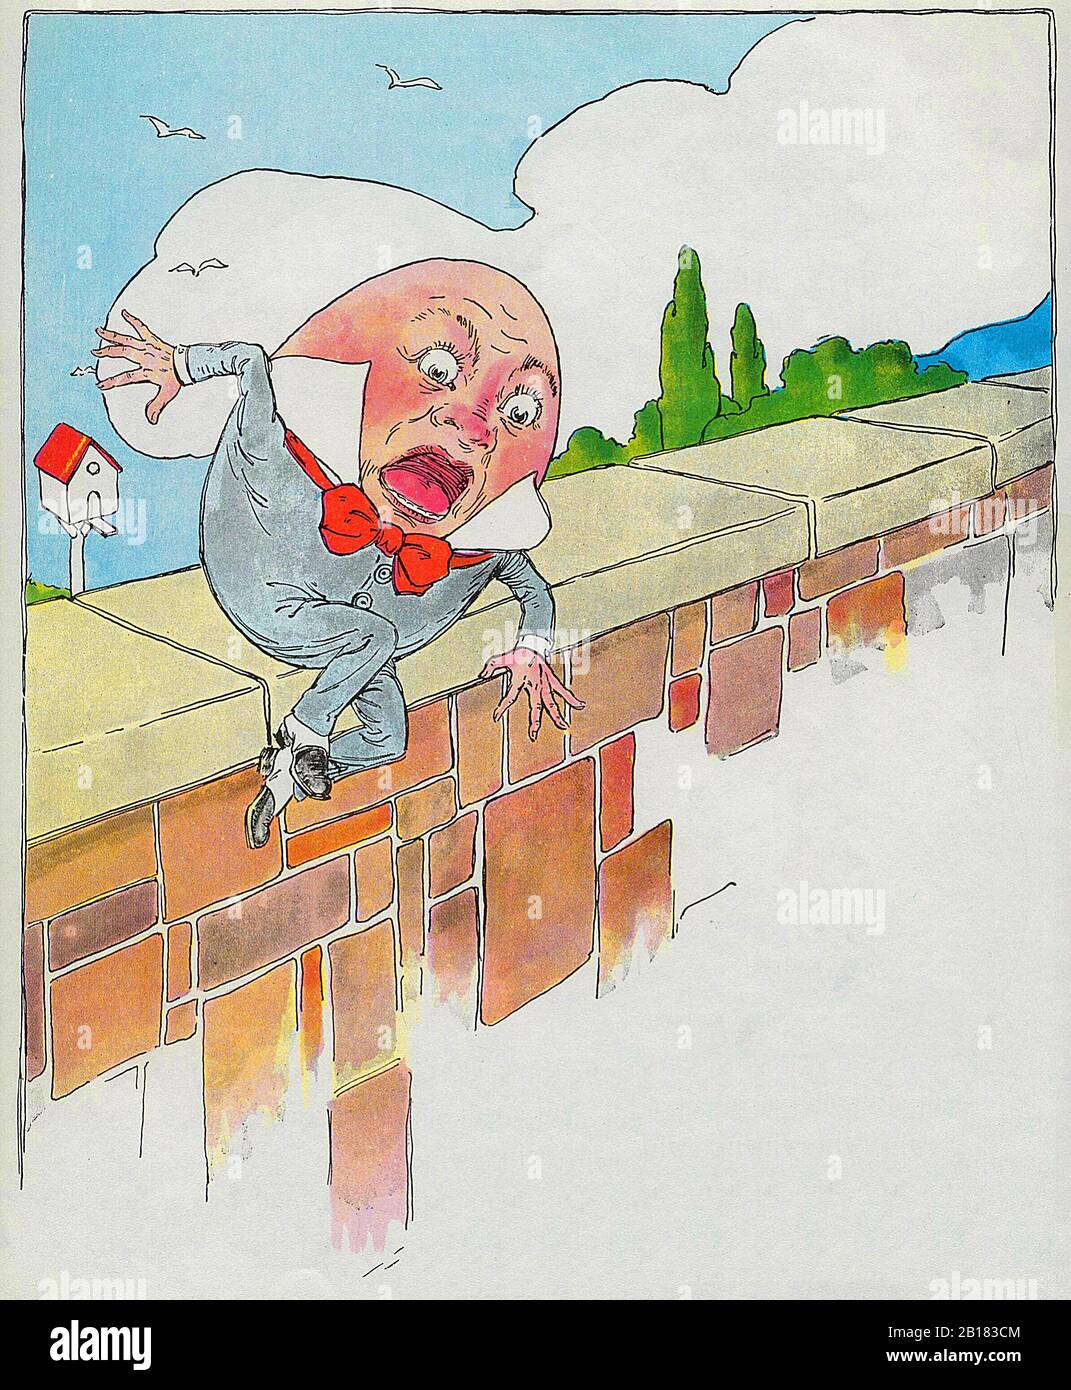 Humpty Dumpty sat on a wall, Humpty Dumpty had a great fall - The Real Mother Goose Nursery Rhyme Illustration by Blanche Fisher Wright circa 1915 Stock Photo